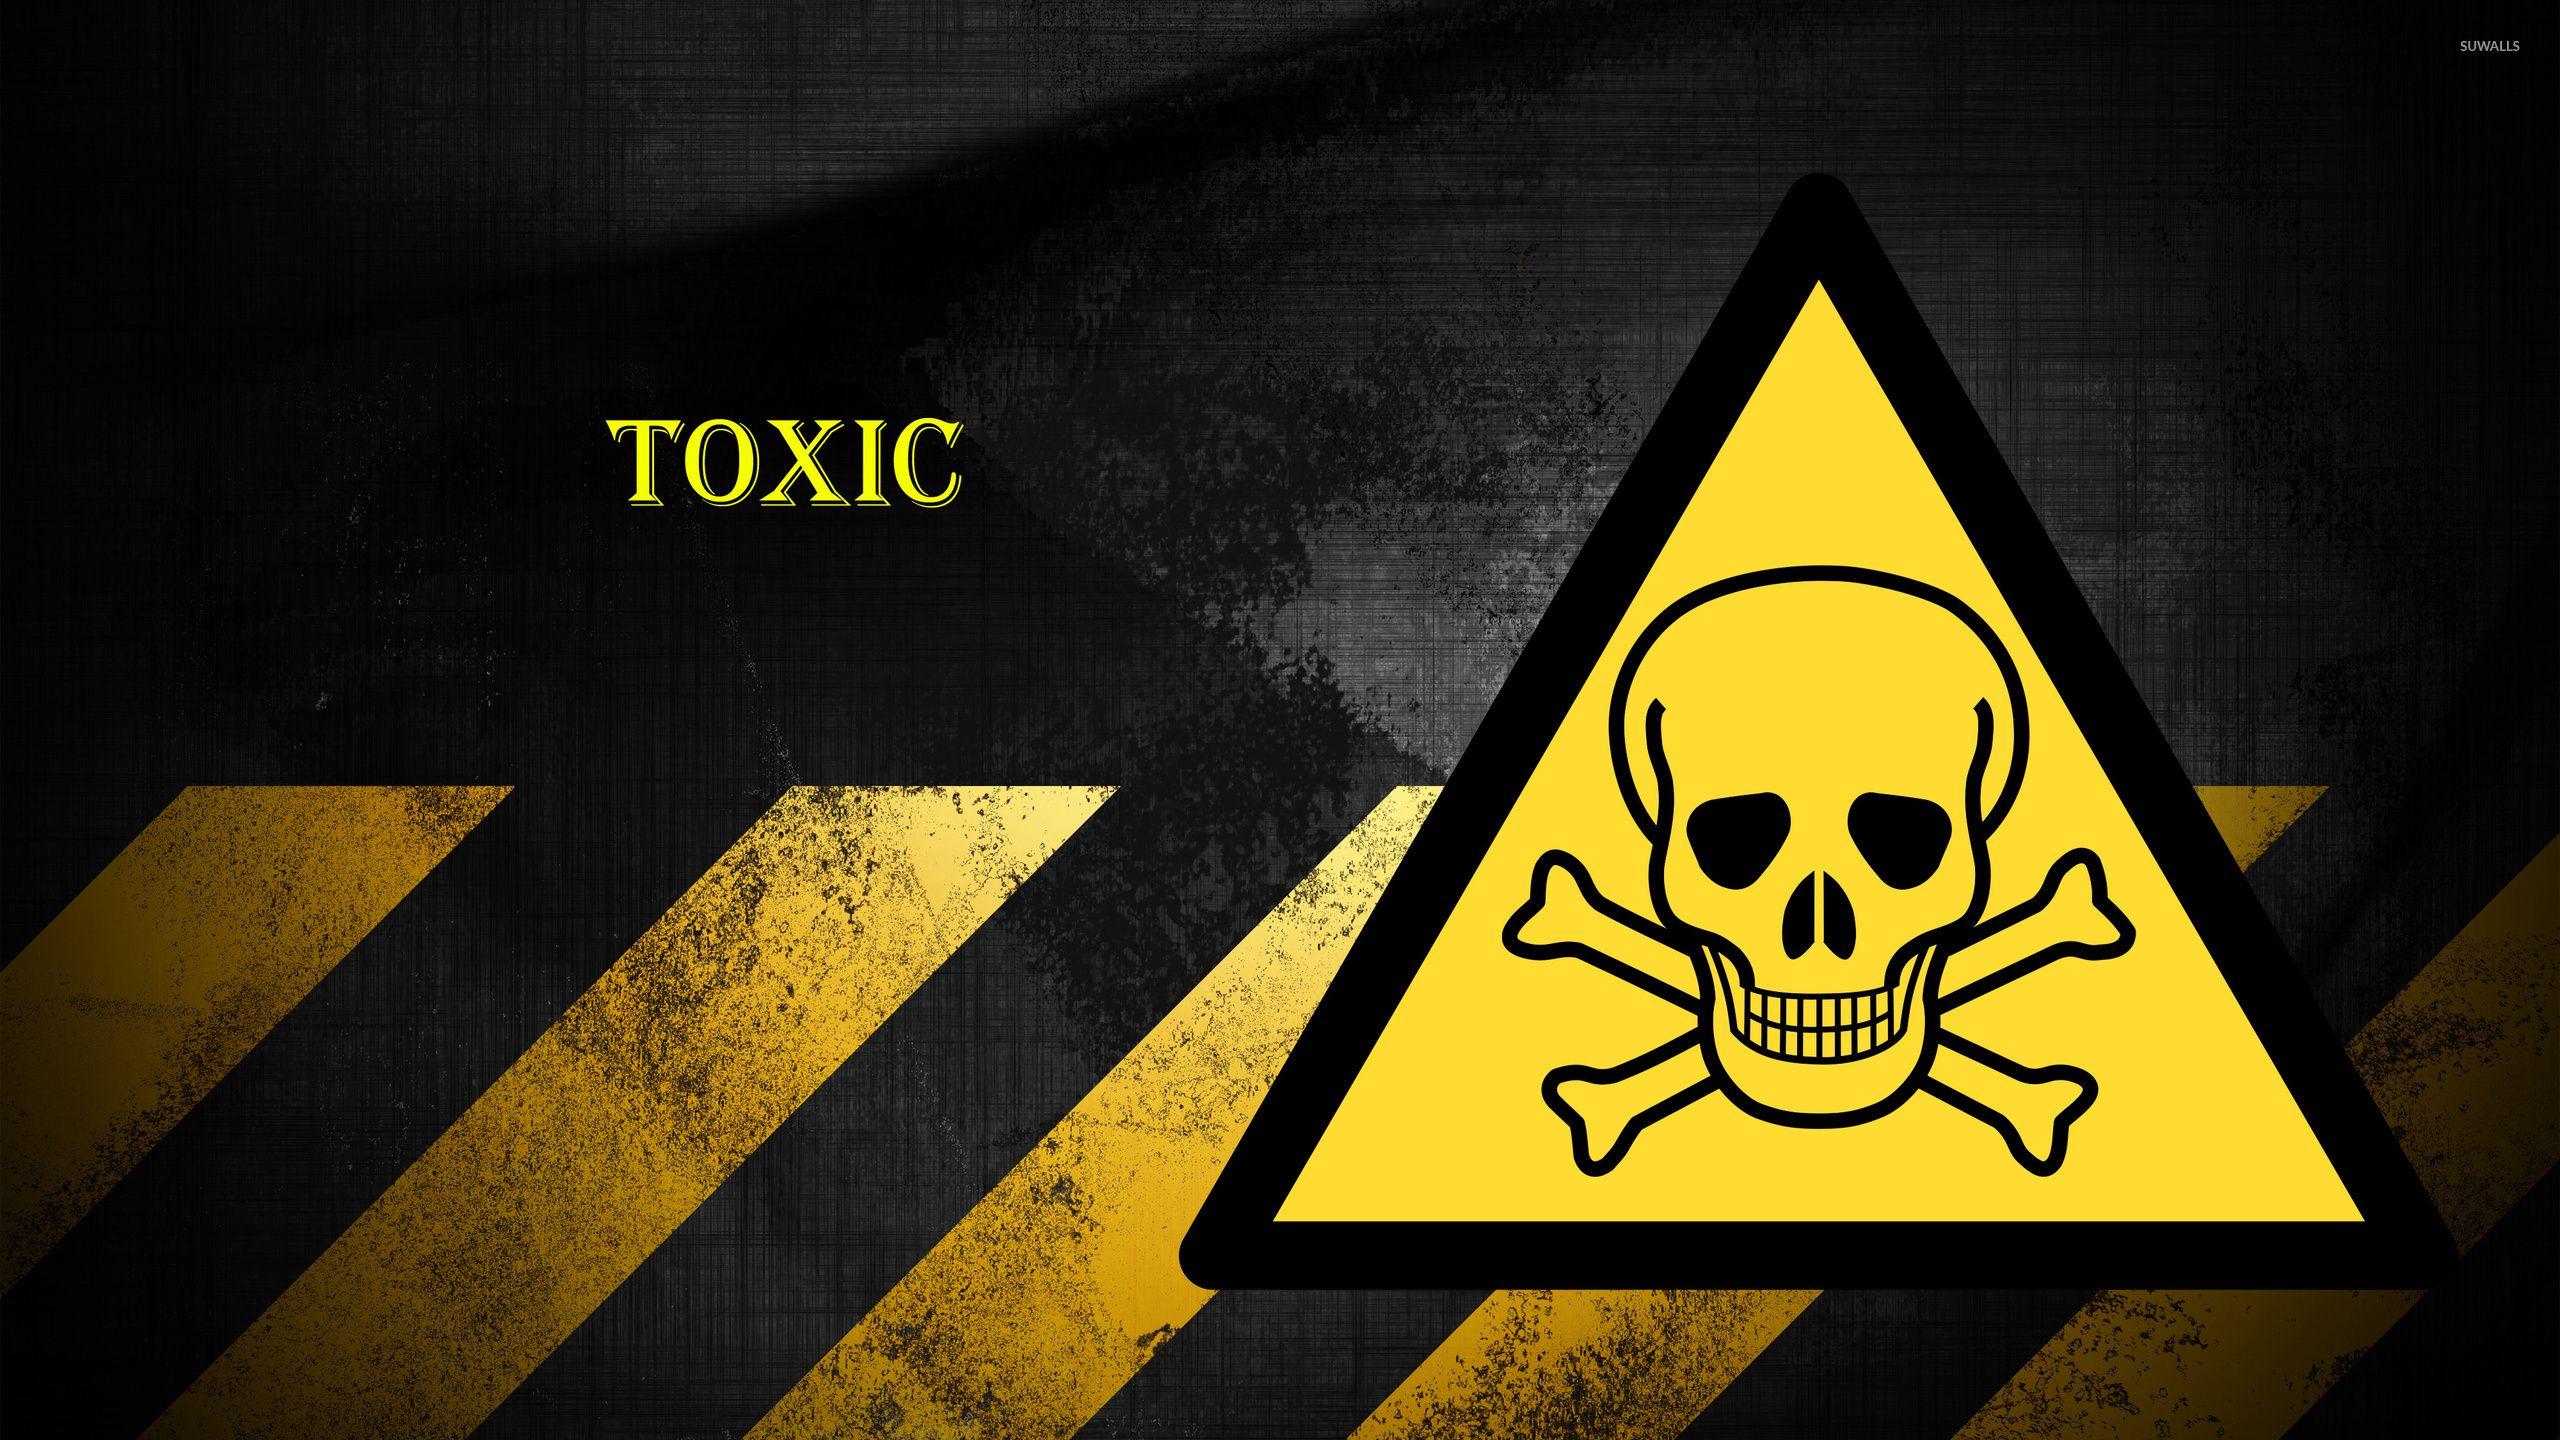 Ten Tips To Protect Your Body from Toxic Chemicals - Jill Carnahan, MD